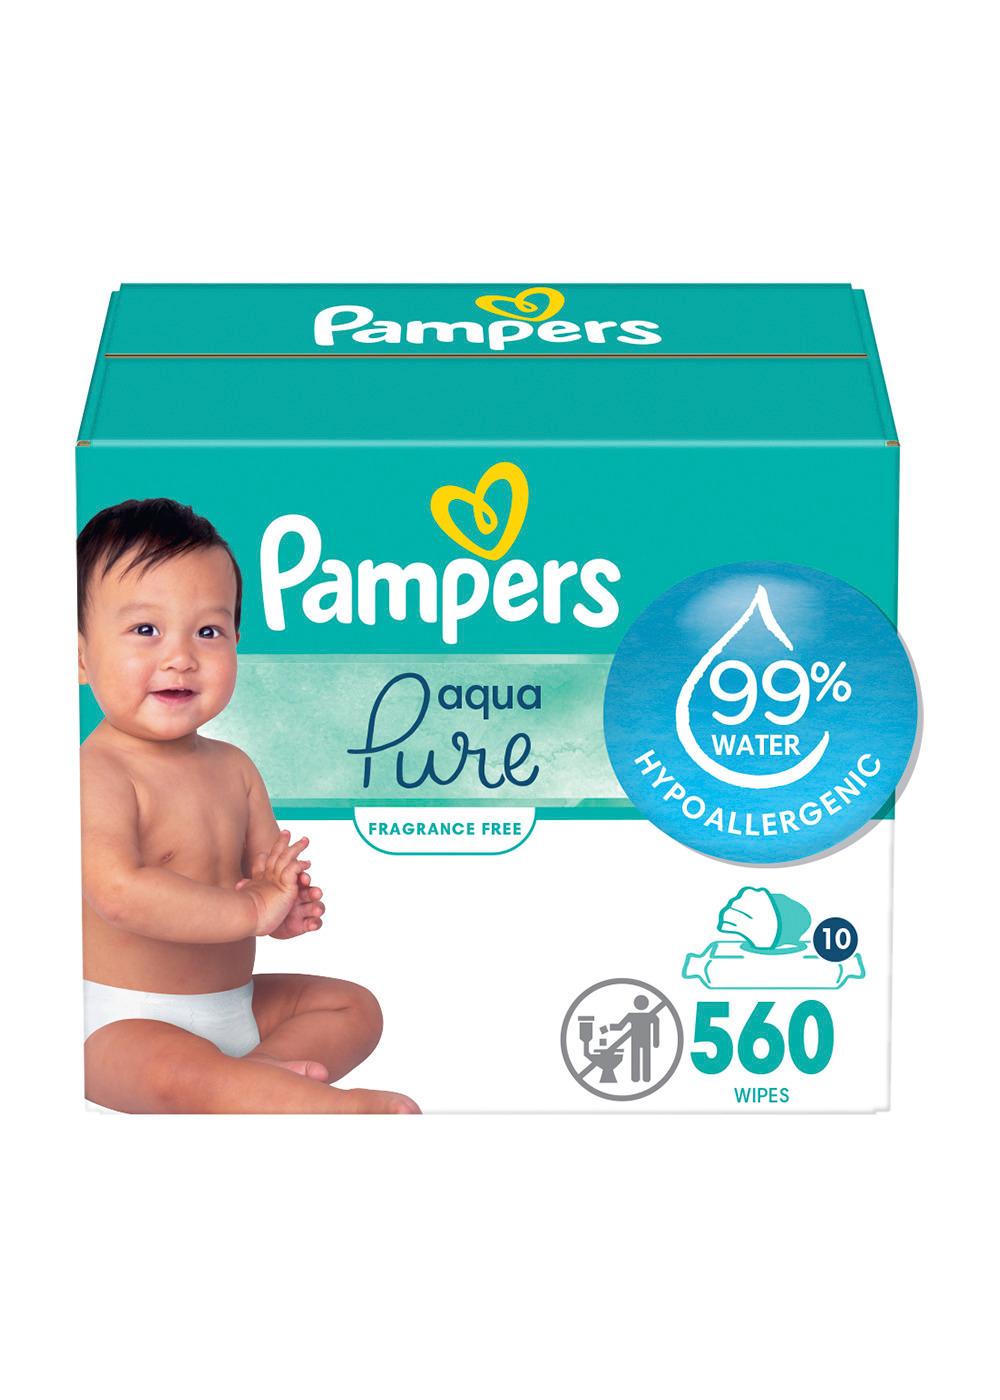 Pampers Aqua Pure Baby Wipes with Pop-Top; image 1 of 8